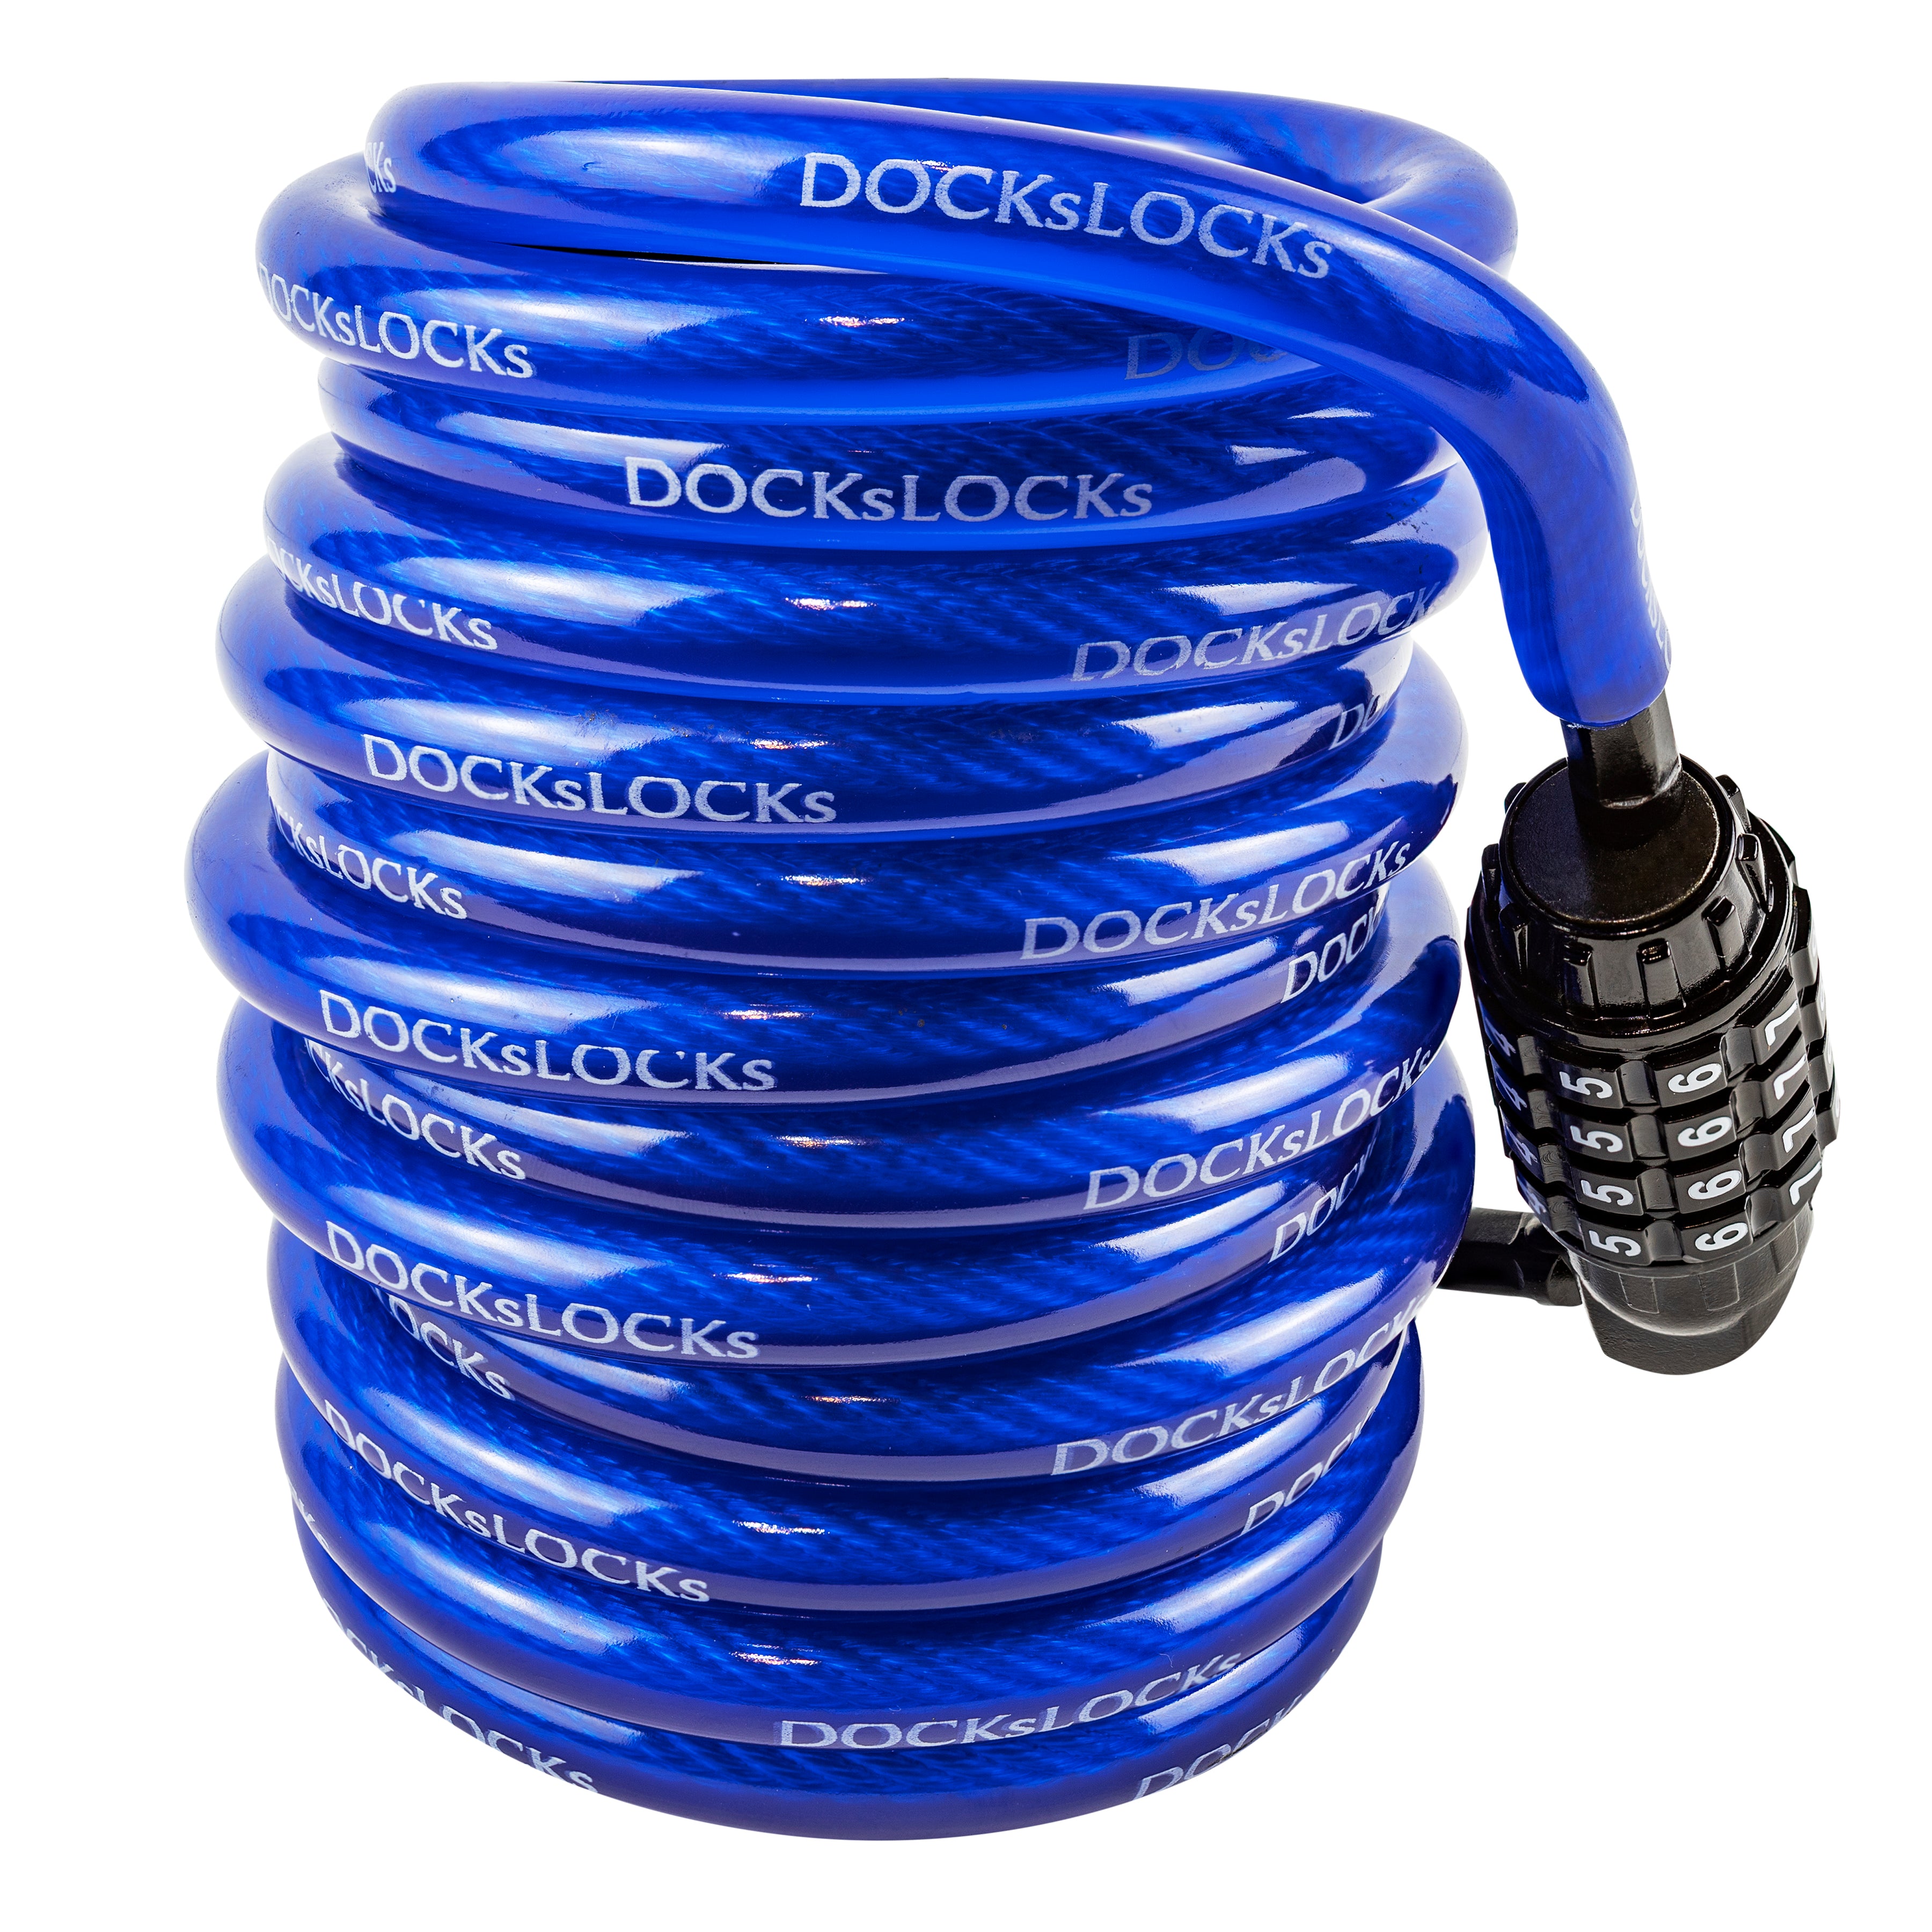 DocksLocks® Anti-Theft Weatherproof Coiled Security Cable with Re-sett